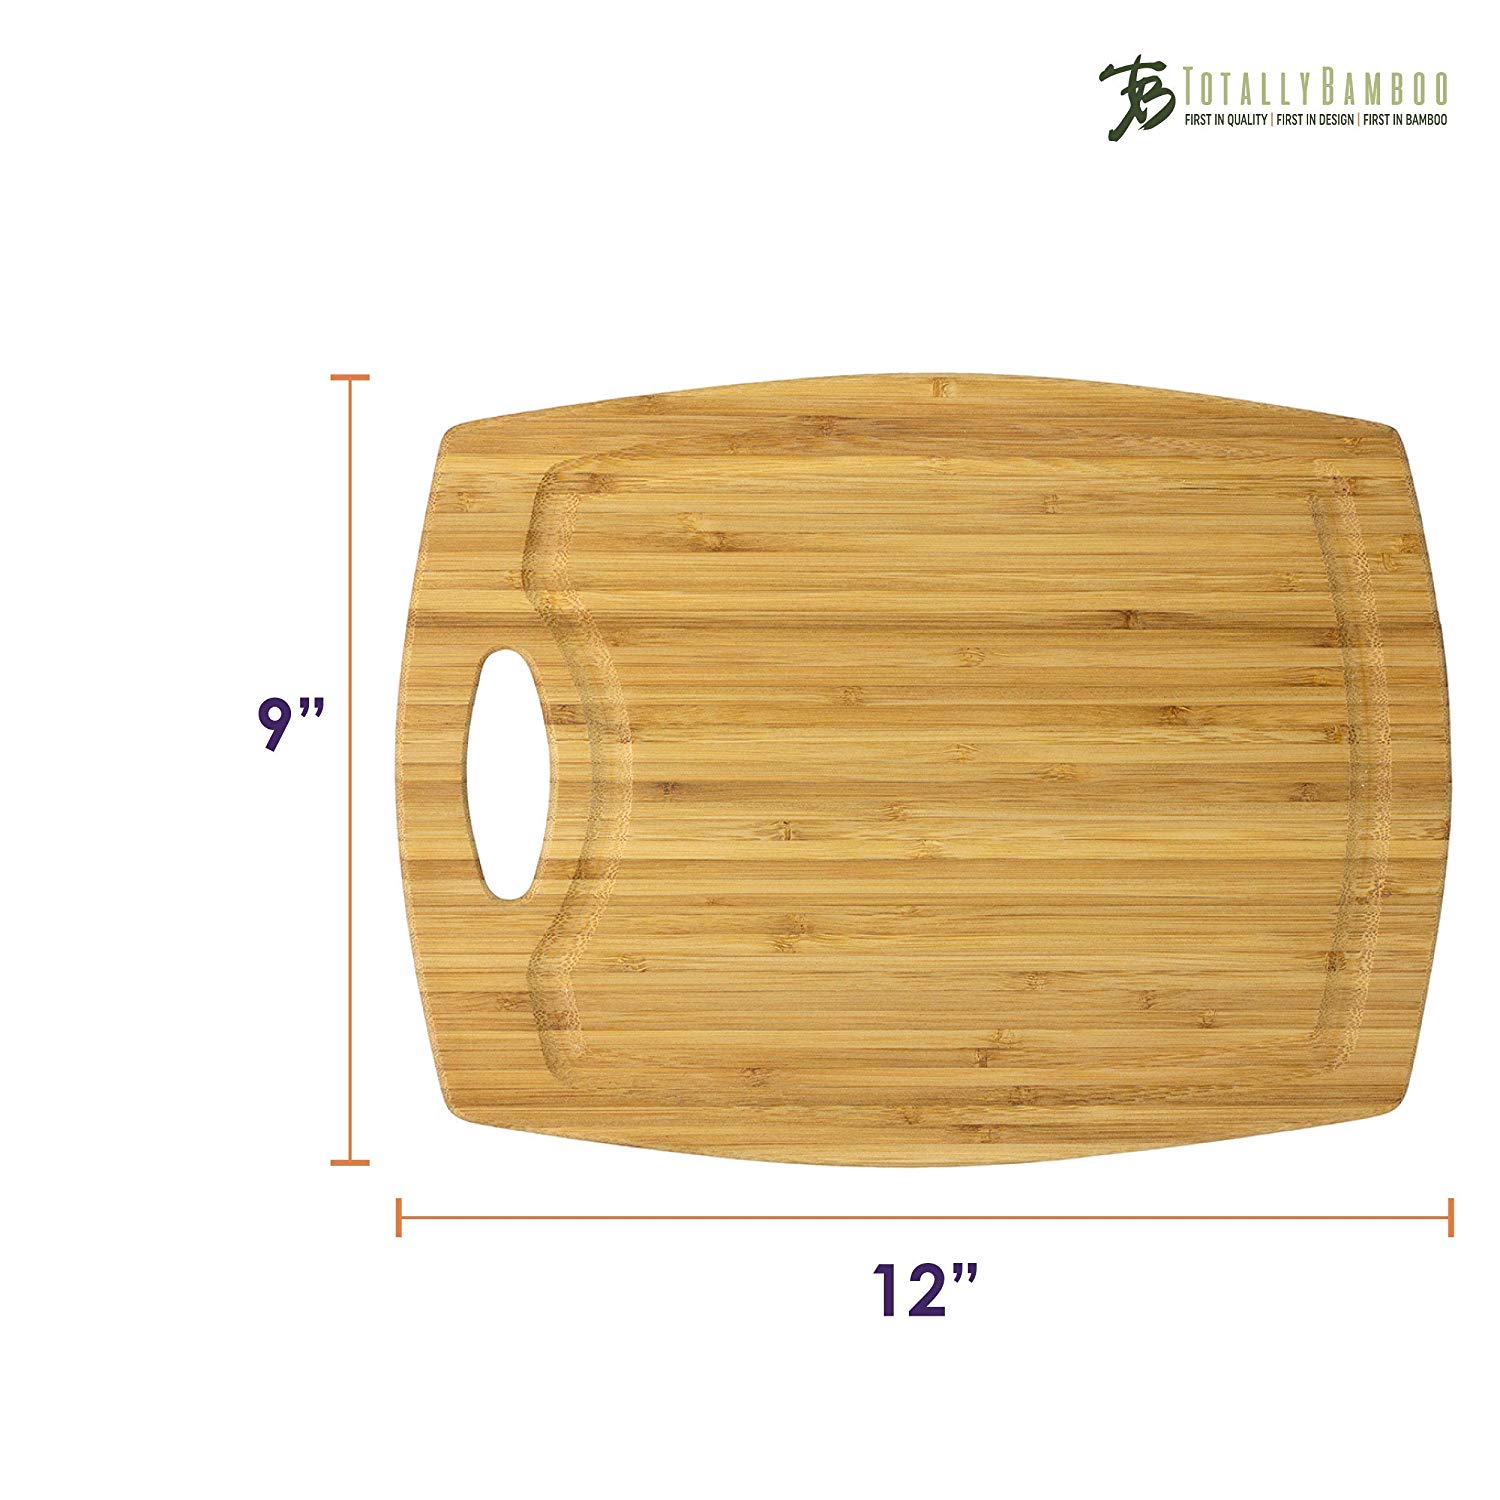 Totally Bamboo 12" Greenlite Dishwasher Safe Cutting Board - image 4 of 5